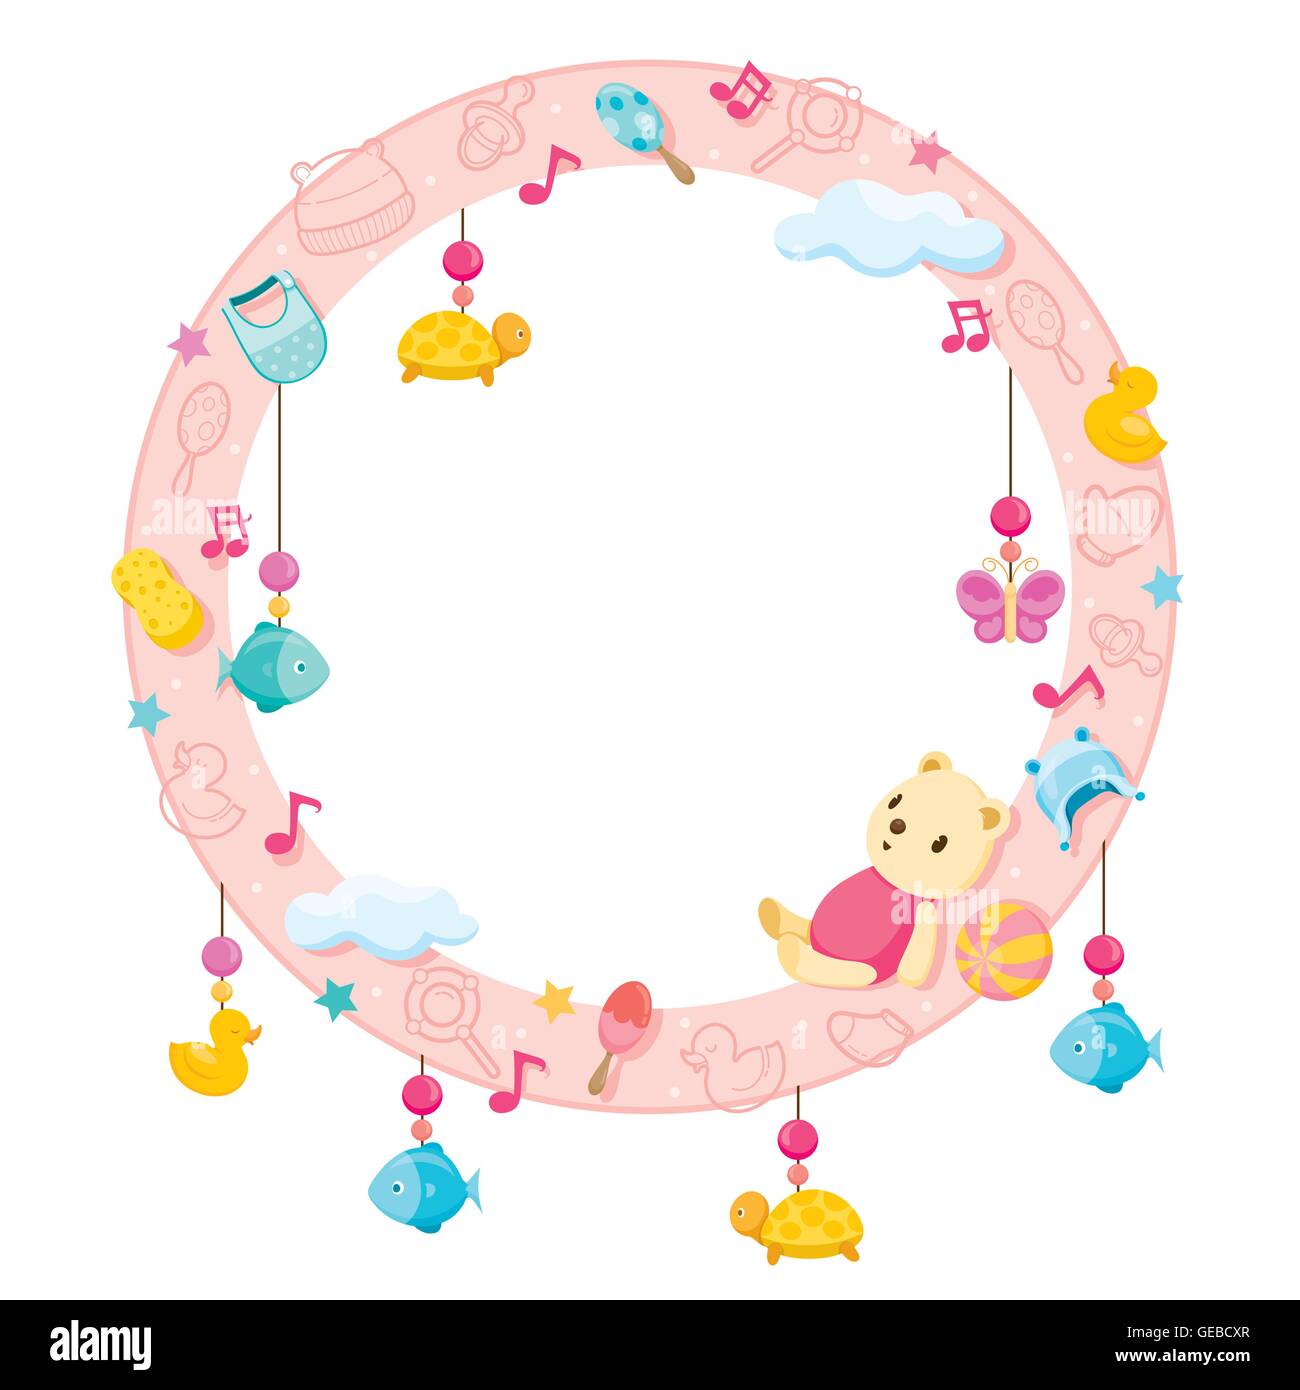 Baby Icons Objects On Round Frame, Accessories, Frame, Objects, Hanging Stock Vector